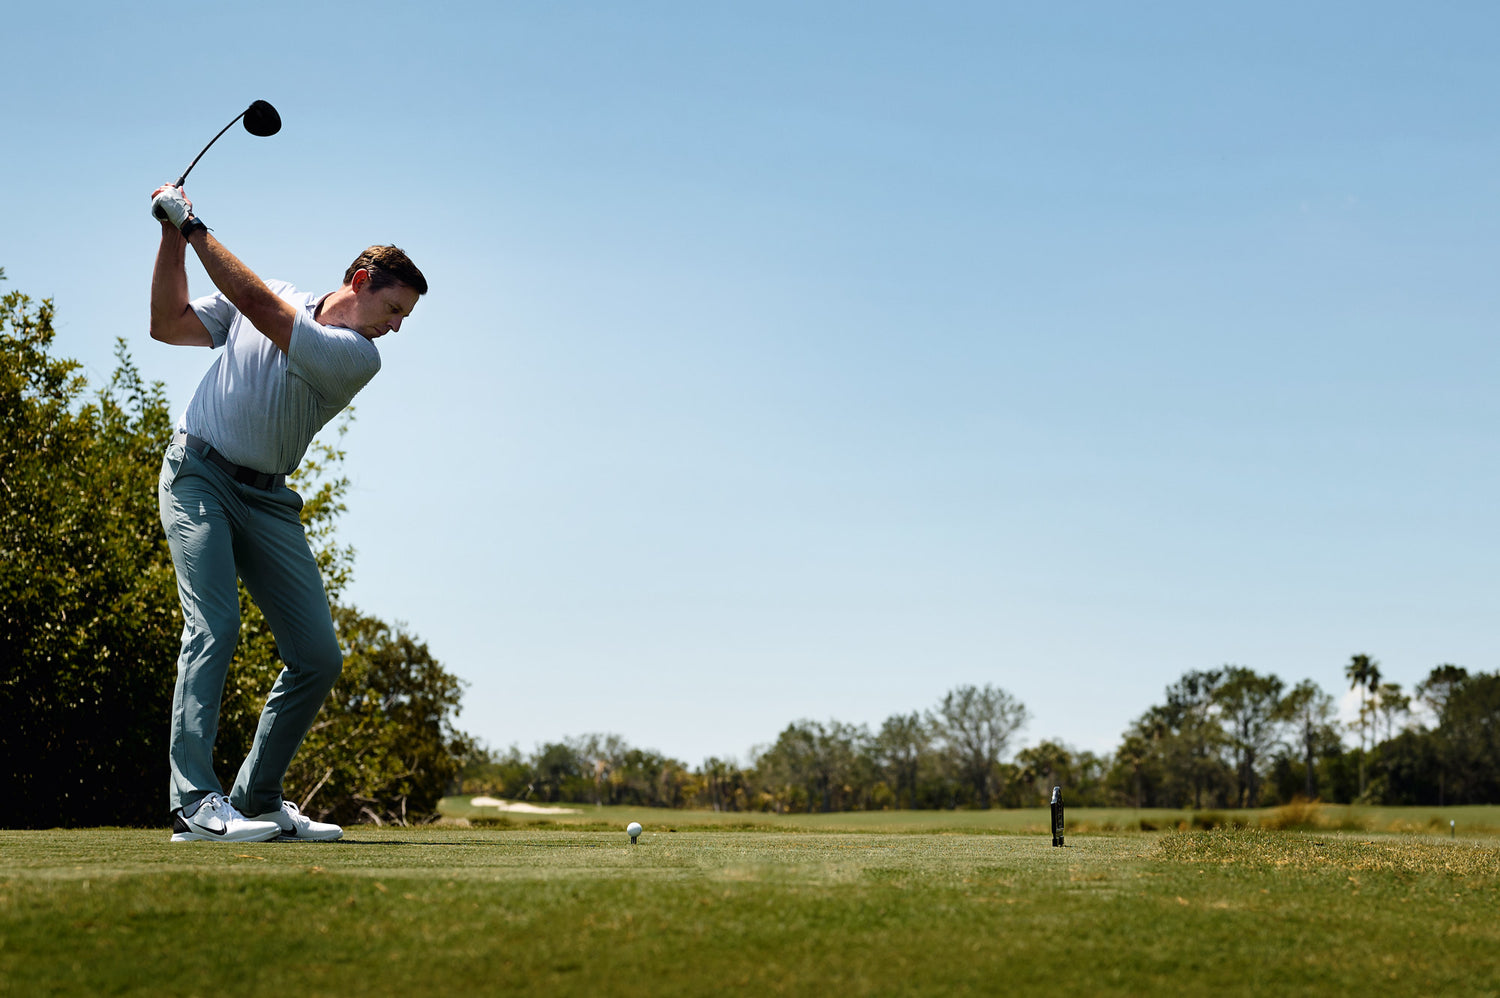 drive farther. drive straighter. reduce deflection by 2 degrees.